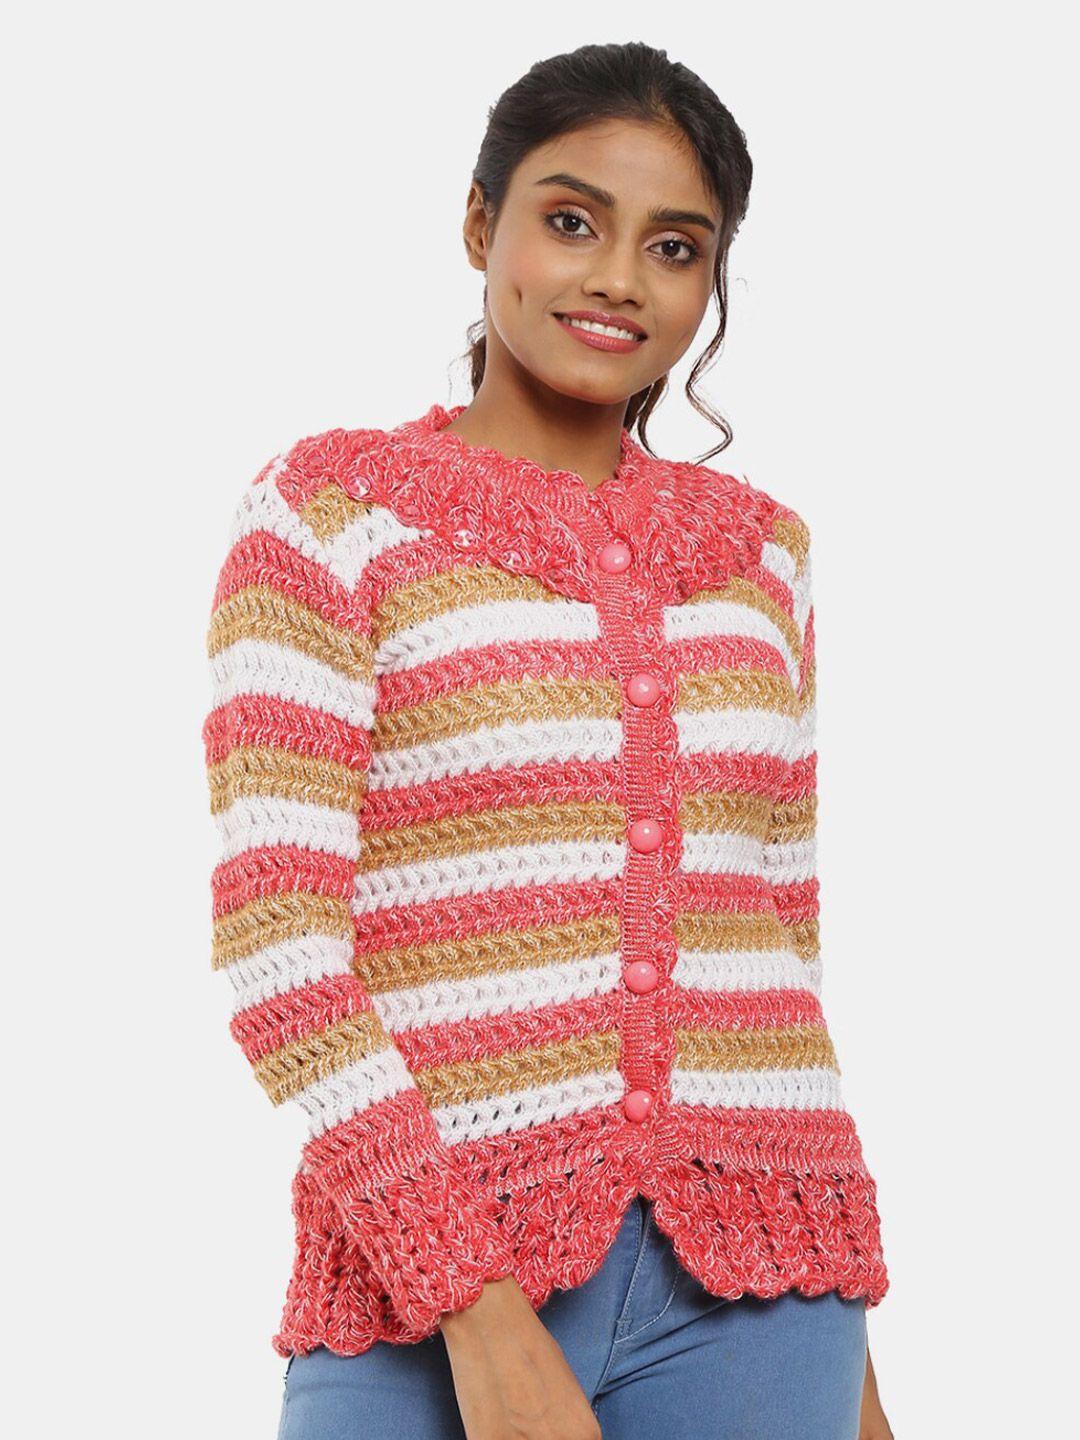 v-mart cable knit acrylic cardigan sweater